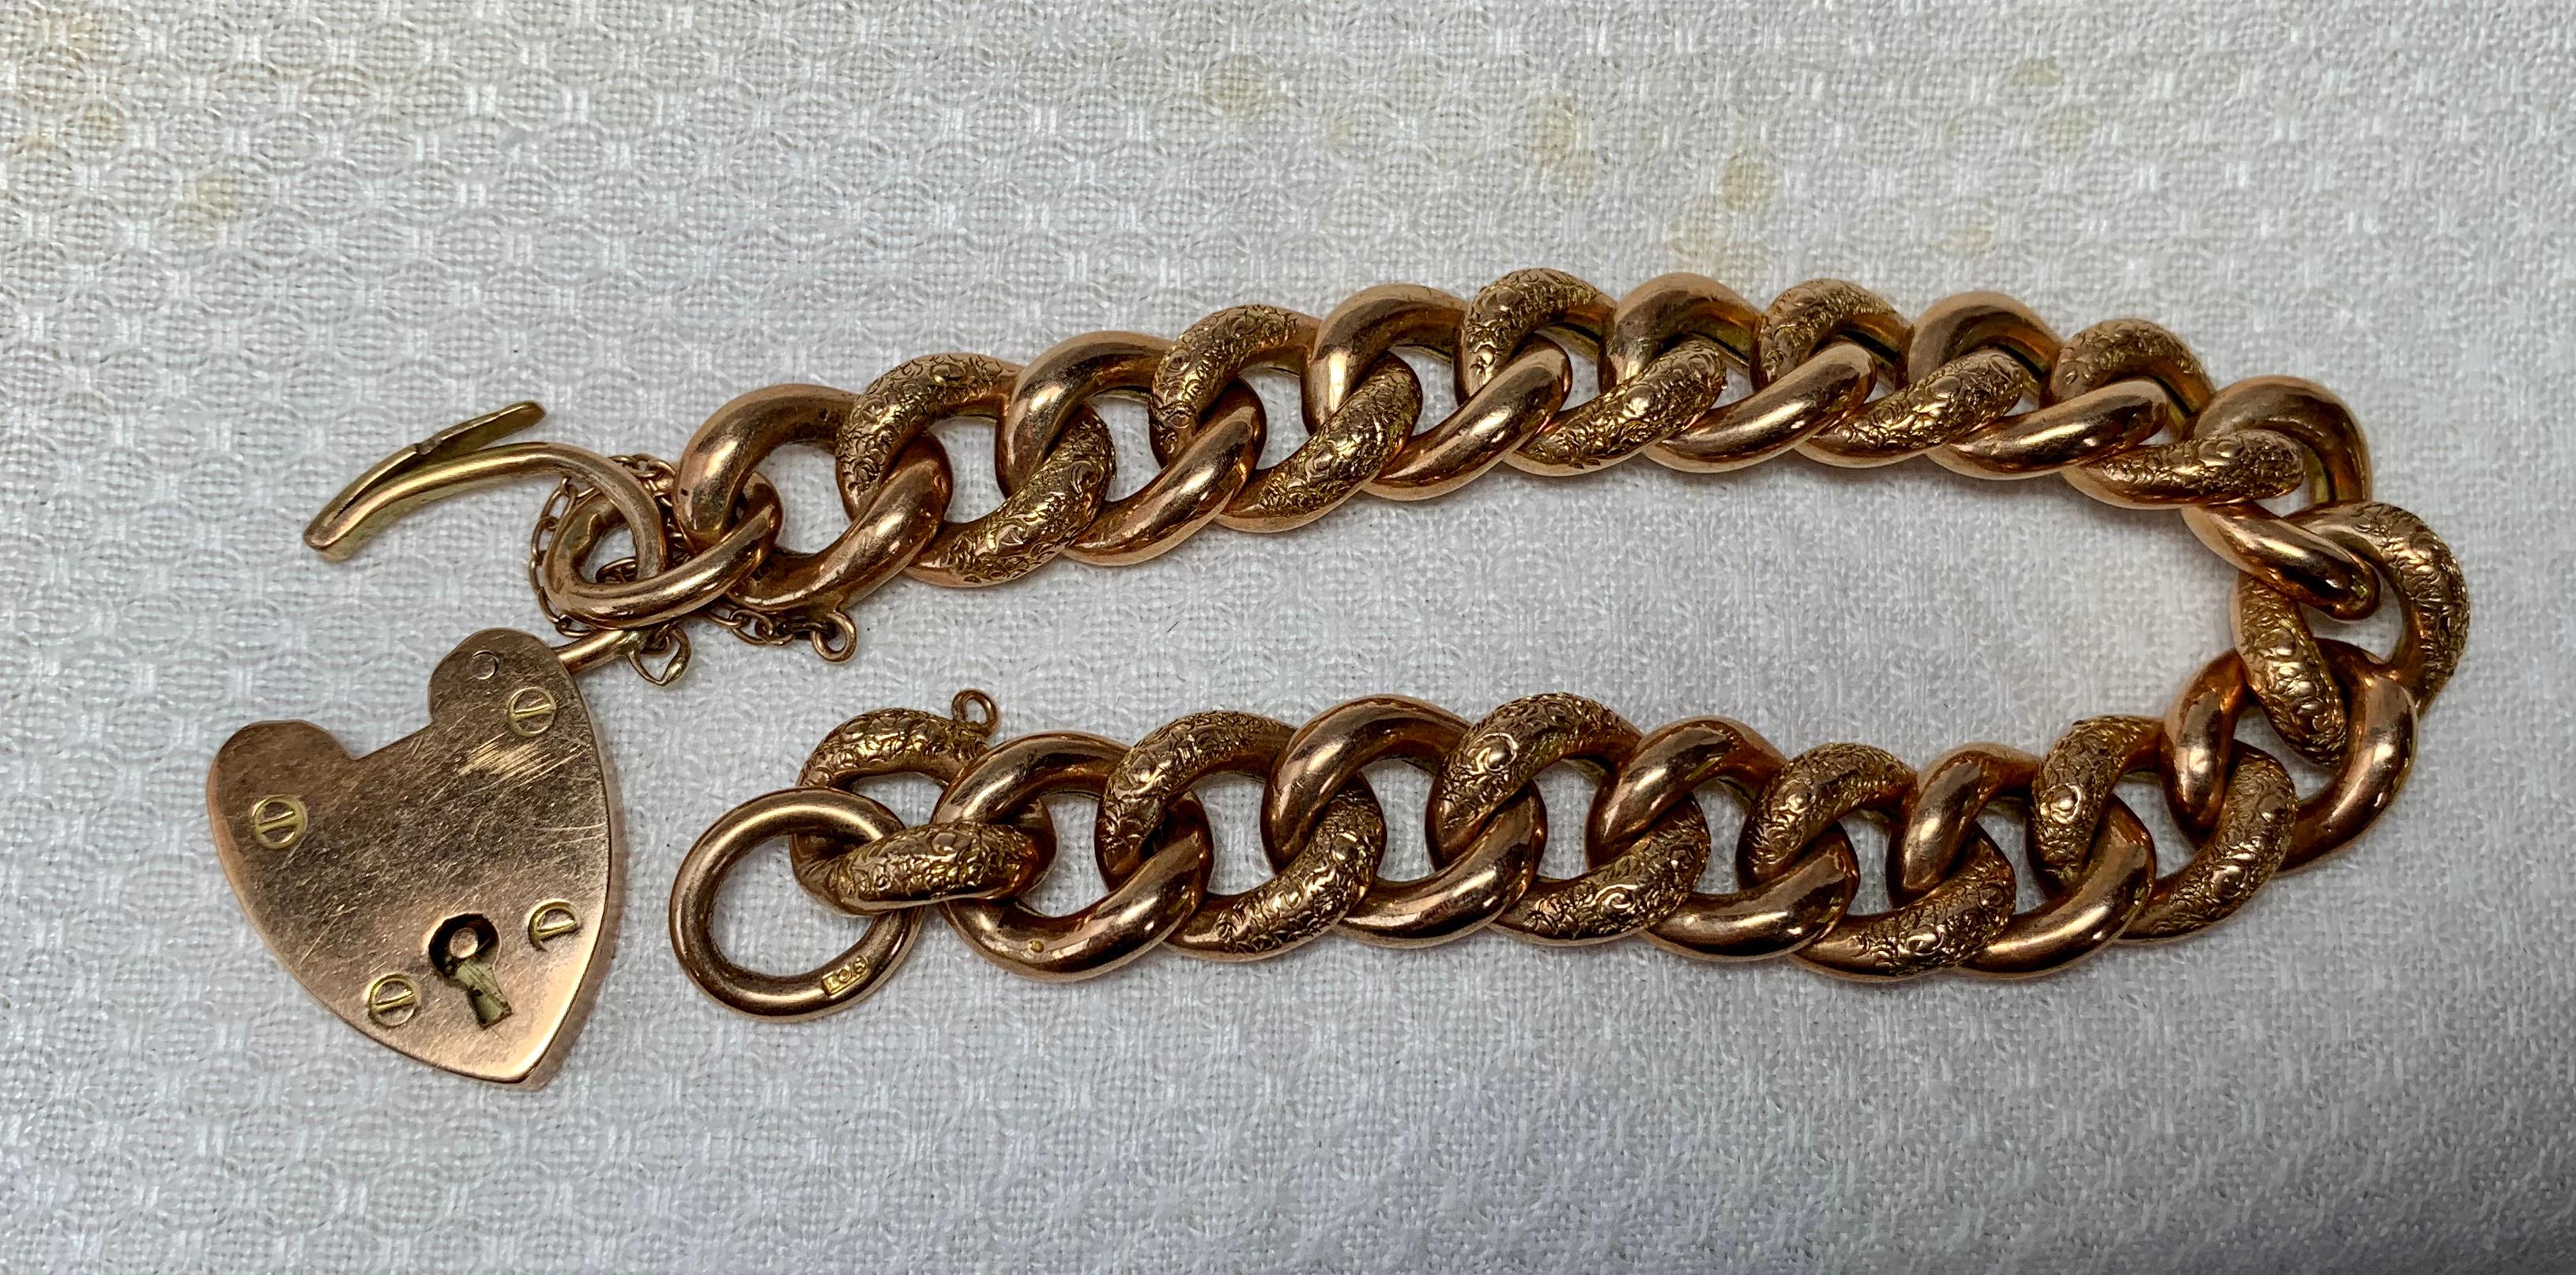 Victorian Engraved Link Bracelet Heart Clasp Gold In Good Condition For Sale In New York, NY